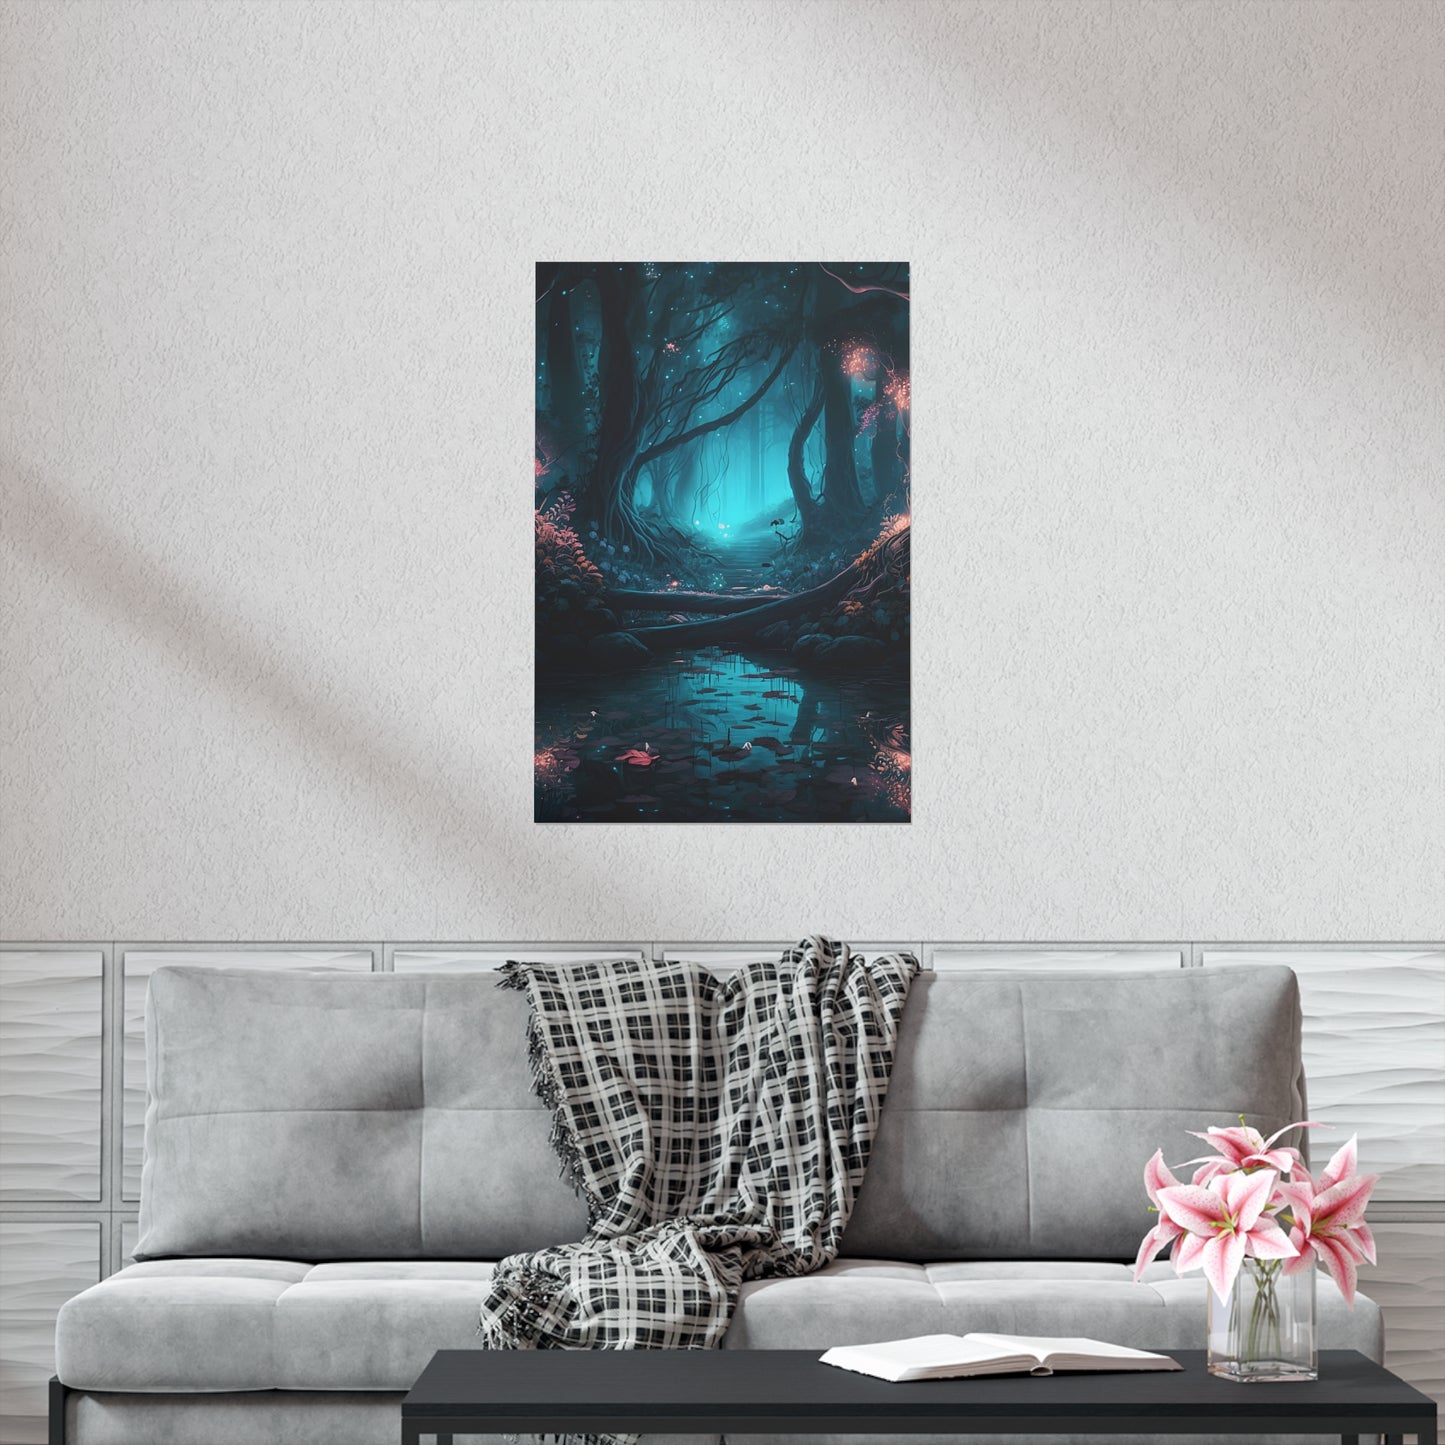 Majestic fantasy forest - Amazing Wall Art Poster